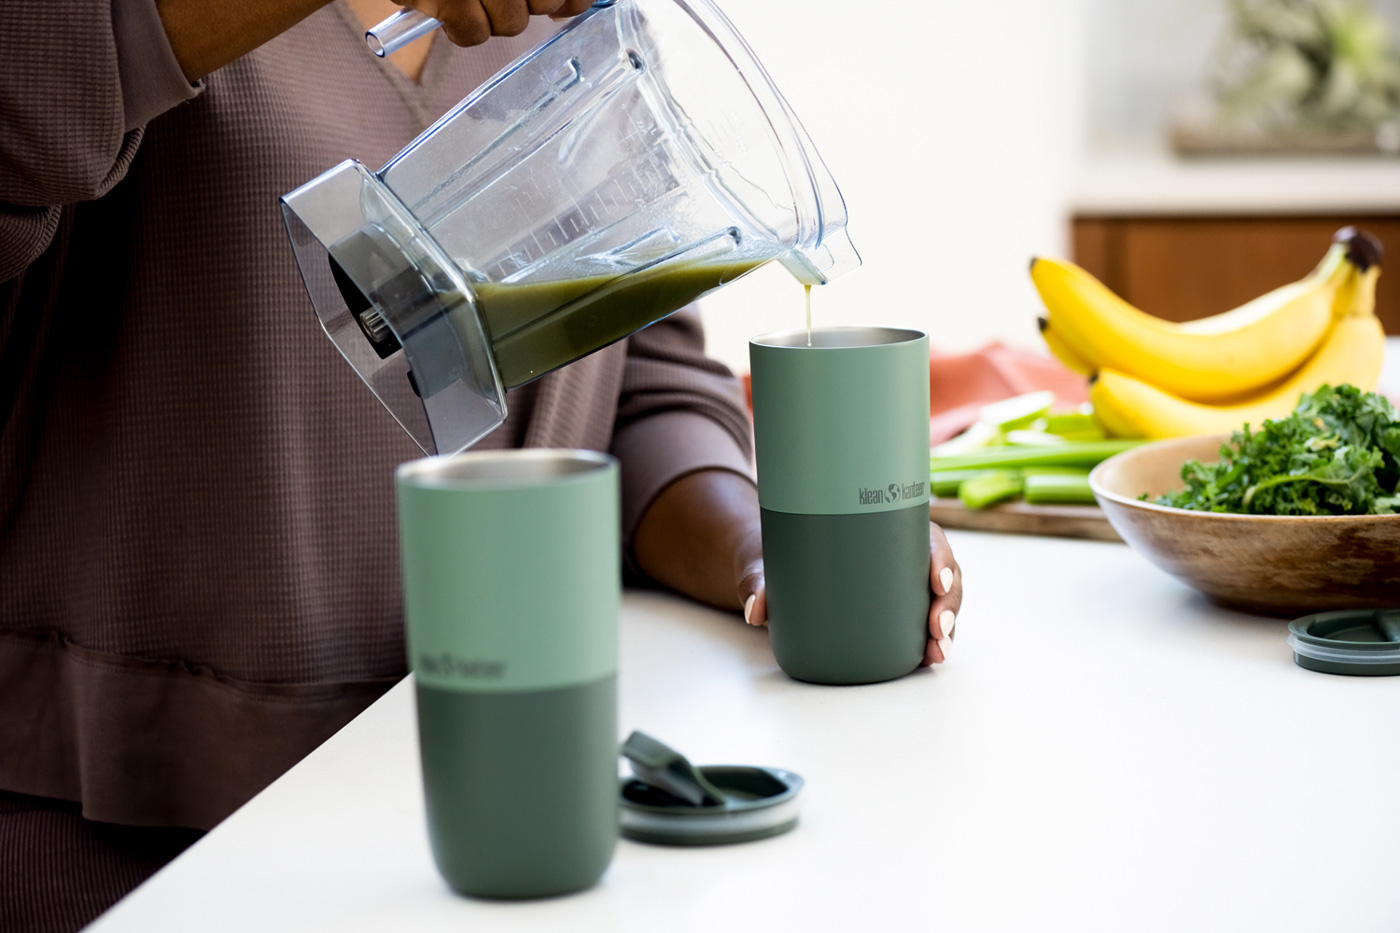 Looking to Buy The Best Tumbler This Year. Here are 10 Key Things to Know Before Buying The Contigo Luxe Stainless Steel Tumbler